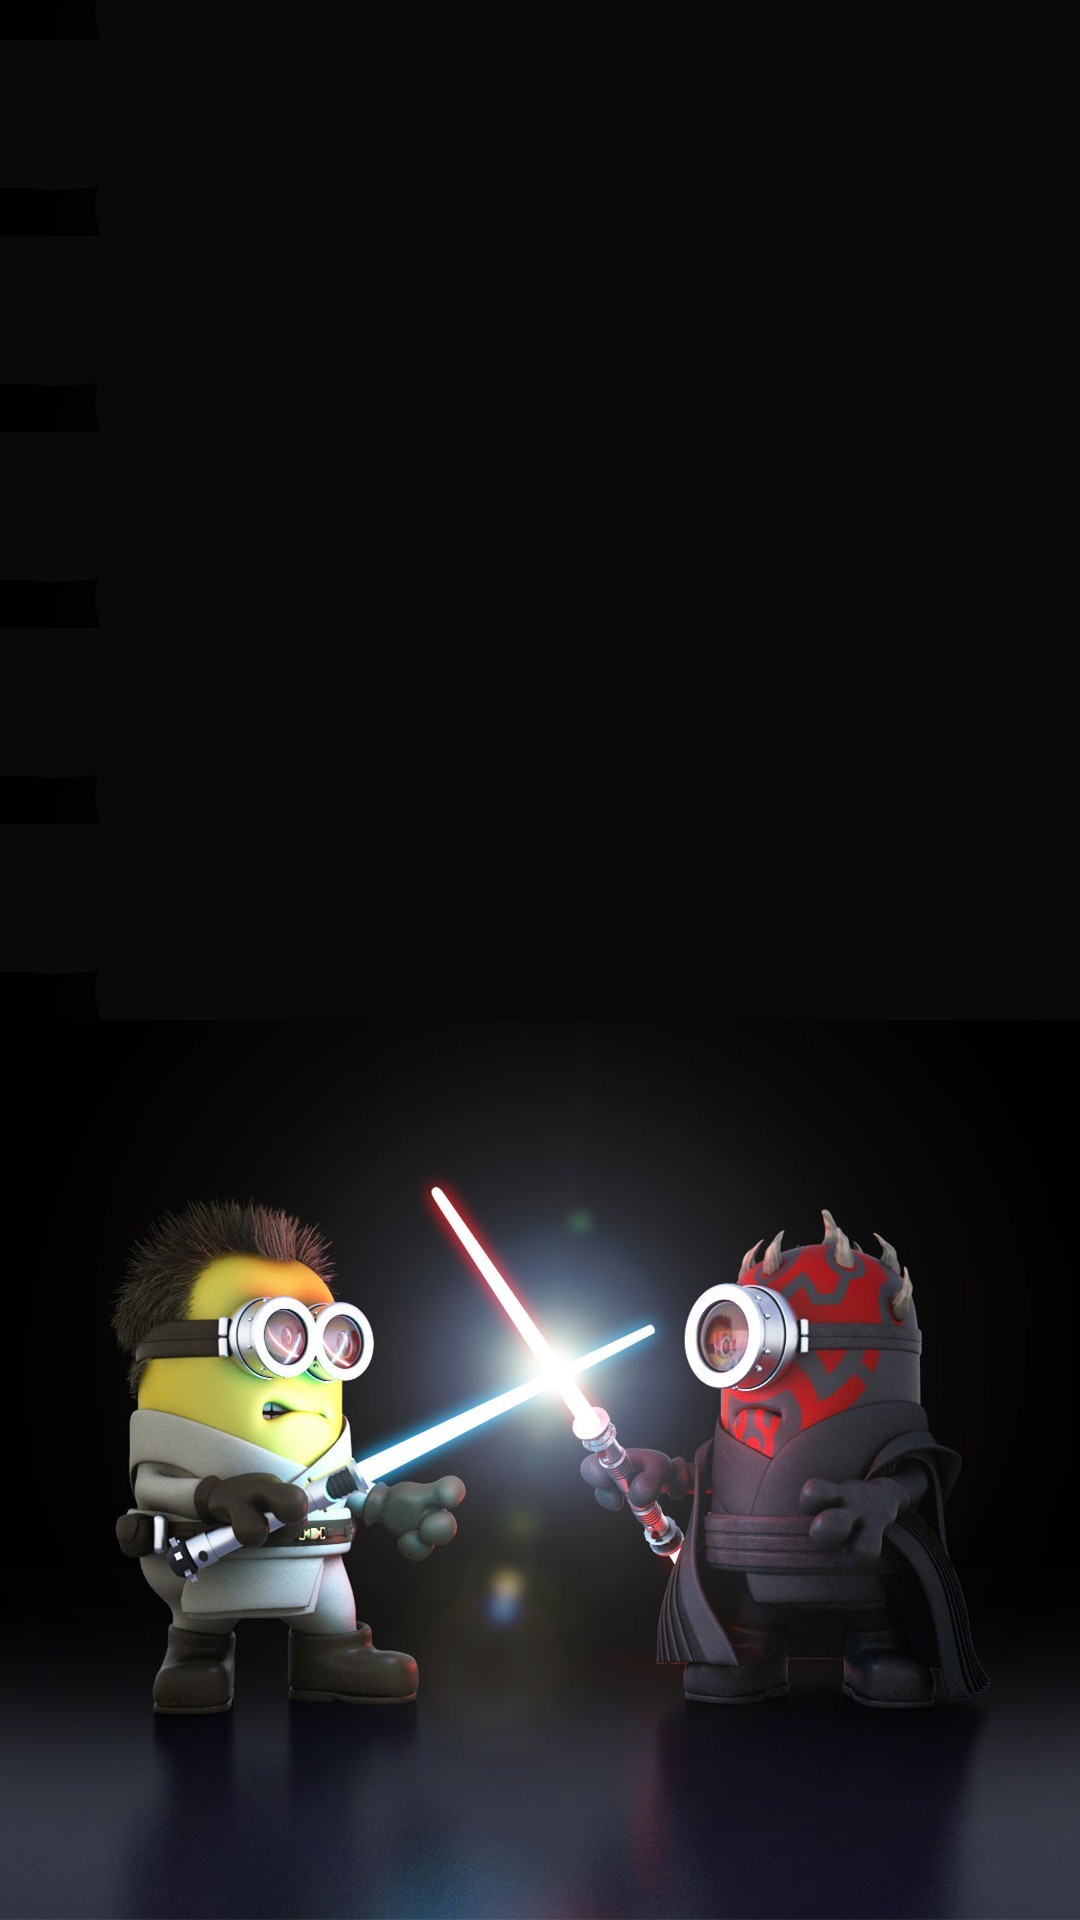 2014 Awesome Despicable Me Inspired Minions Star Wars iphone 6 plus wallpaper for Halloween #iphone